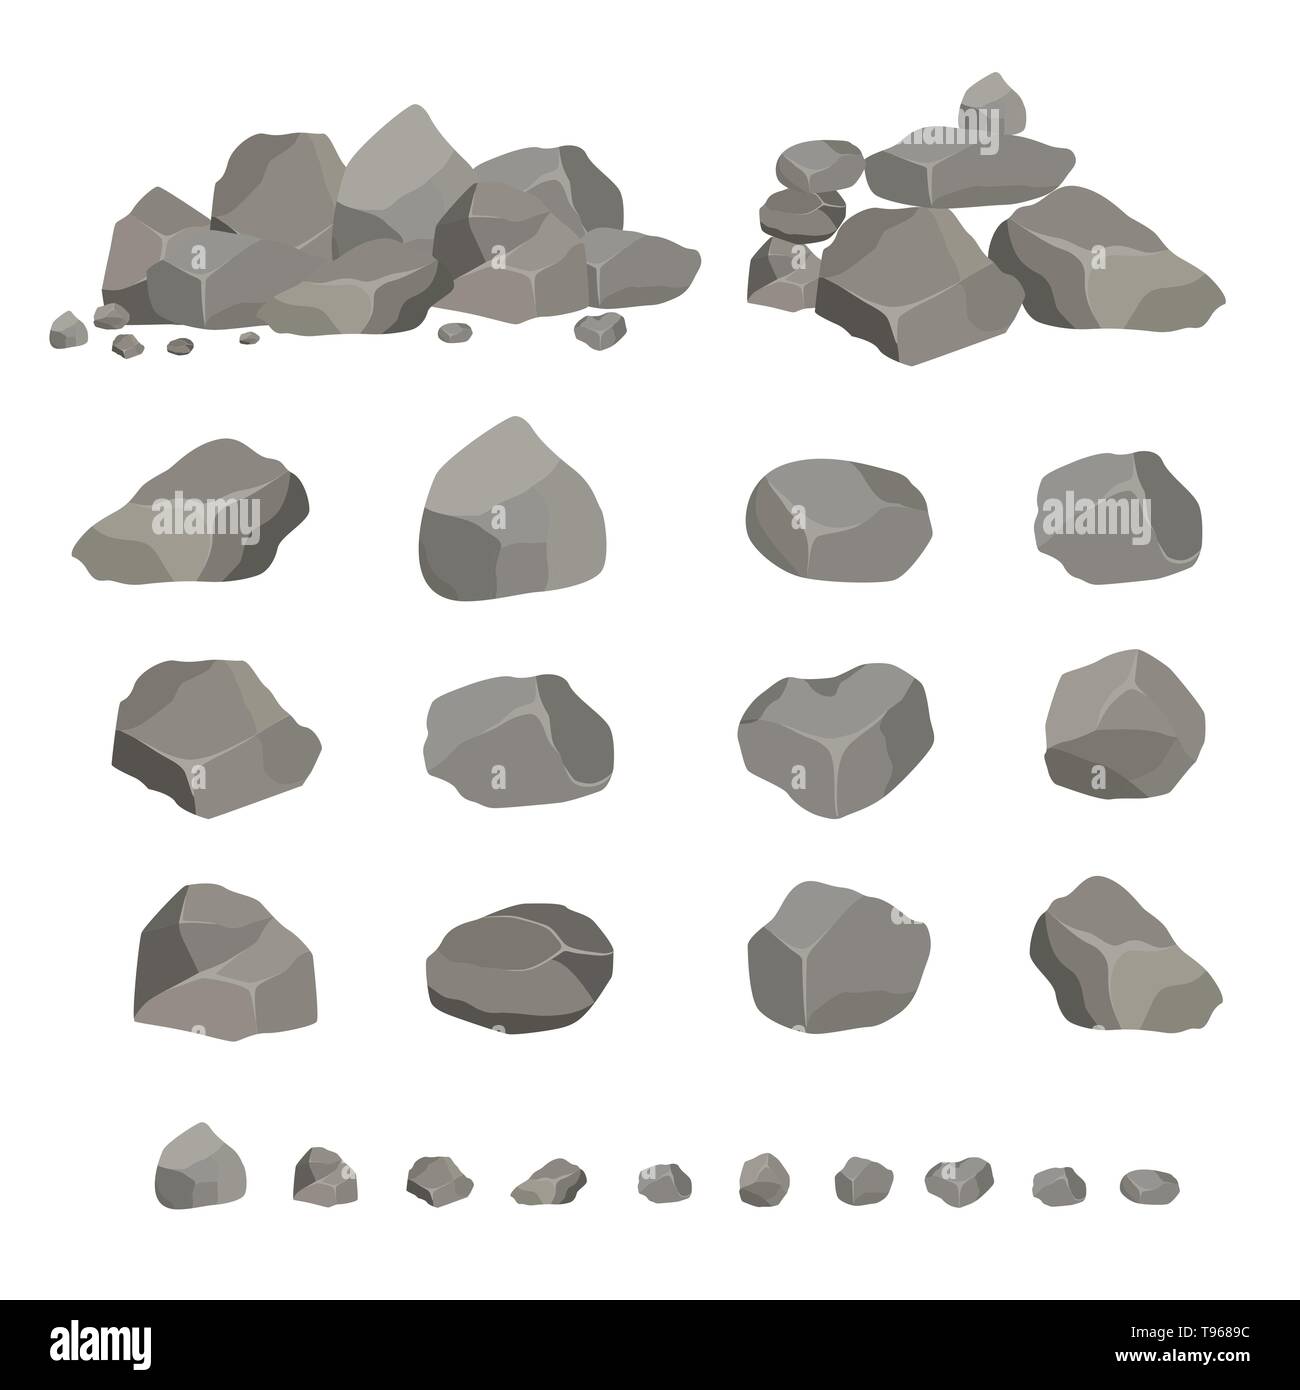 Granite rock shapes Stock Vector Images - Alamy